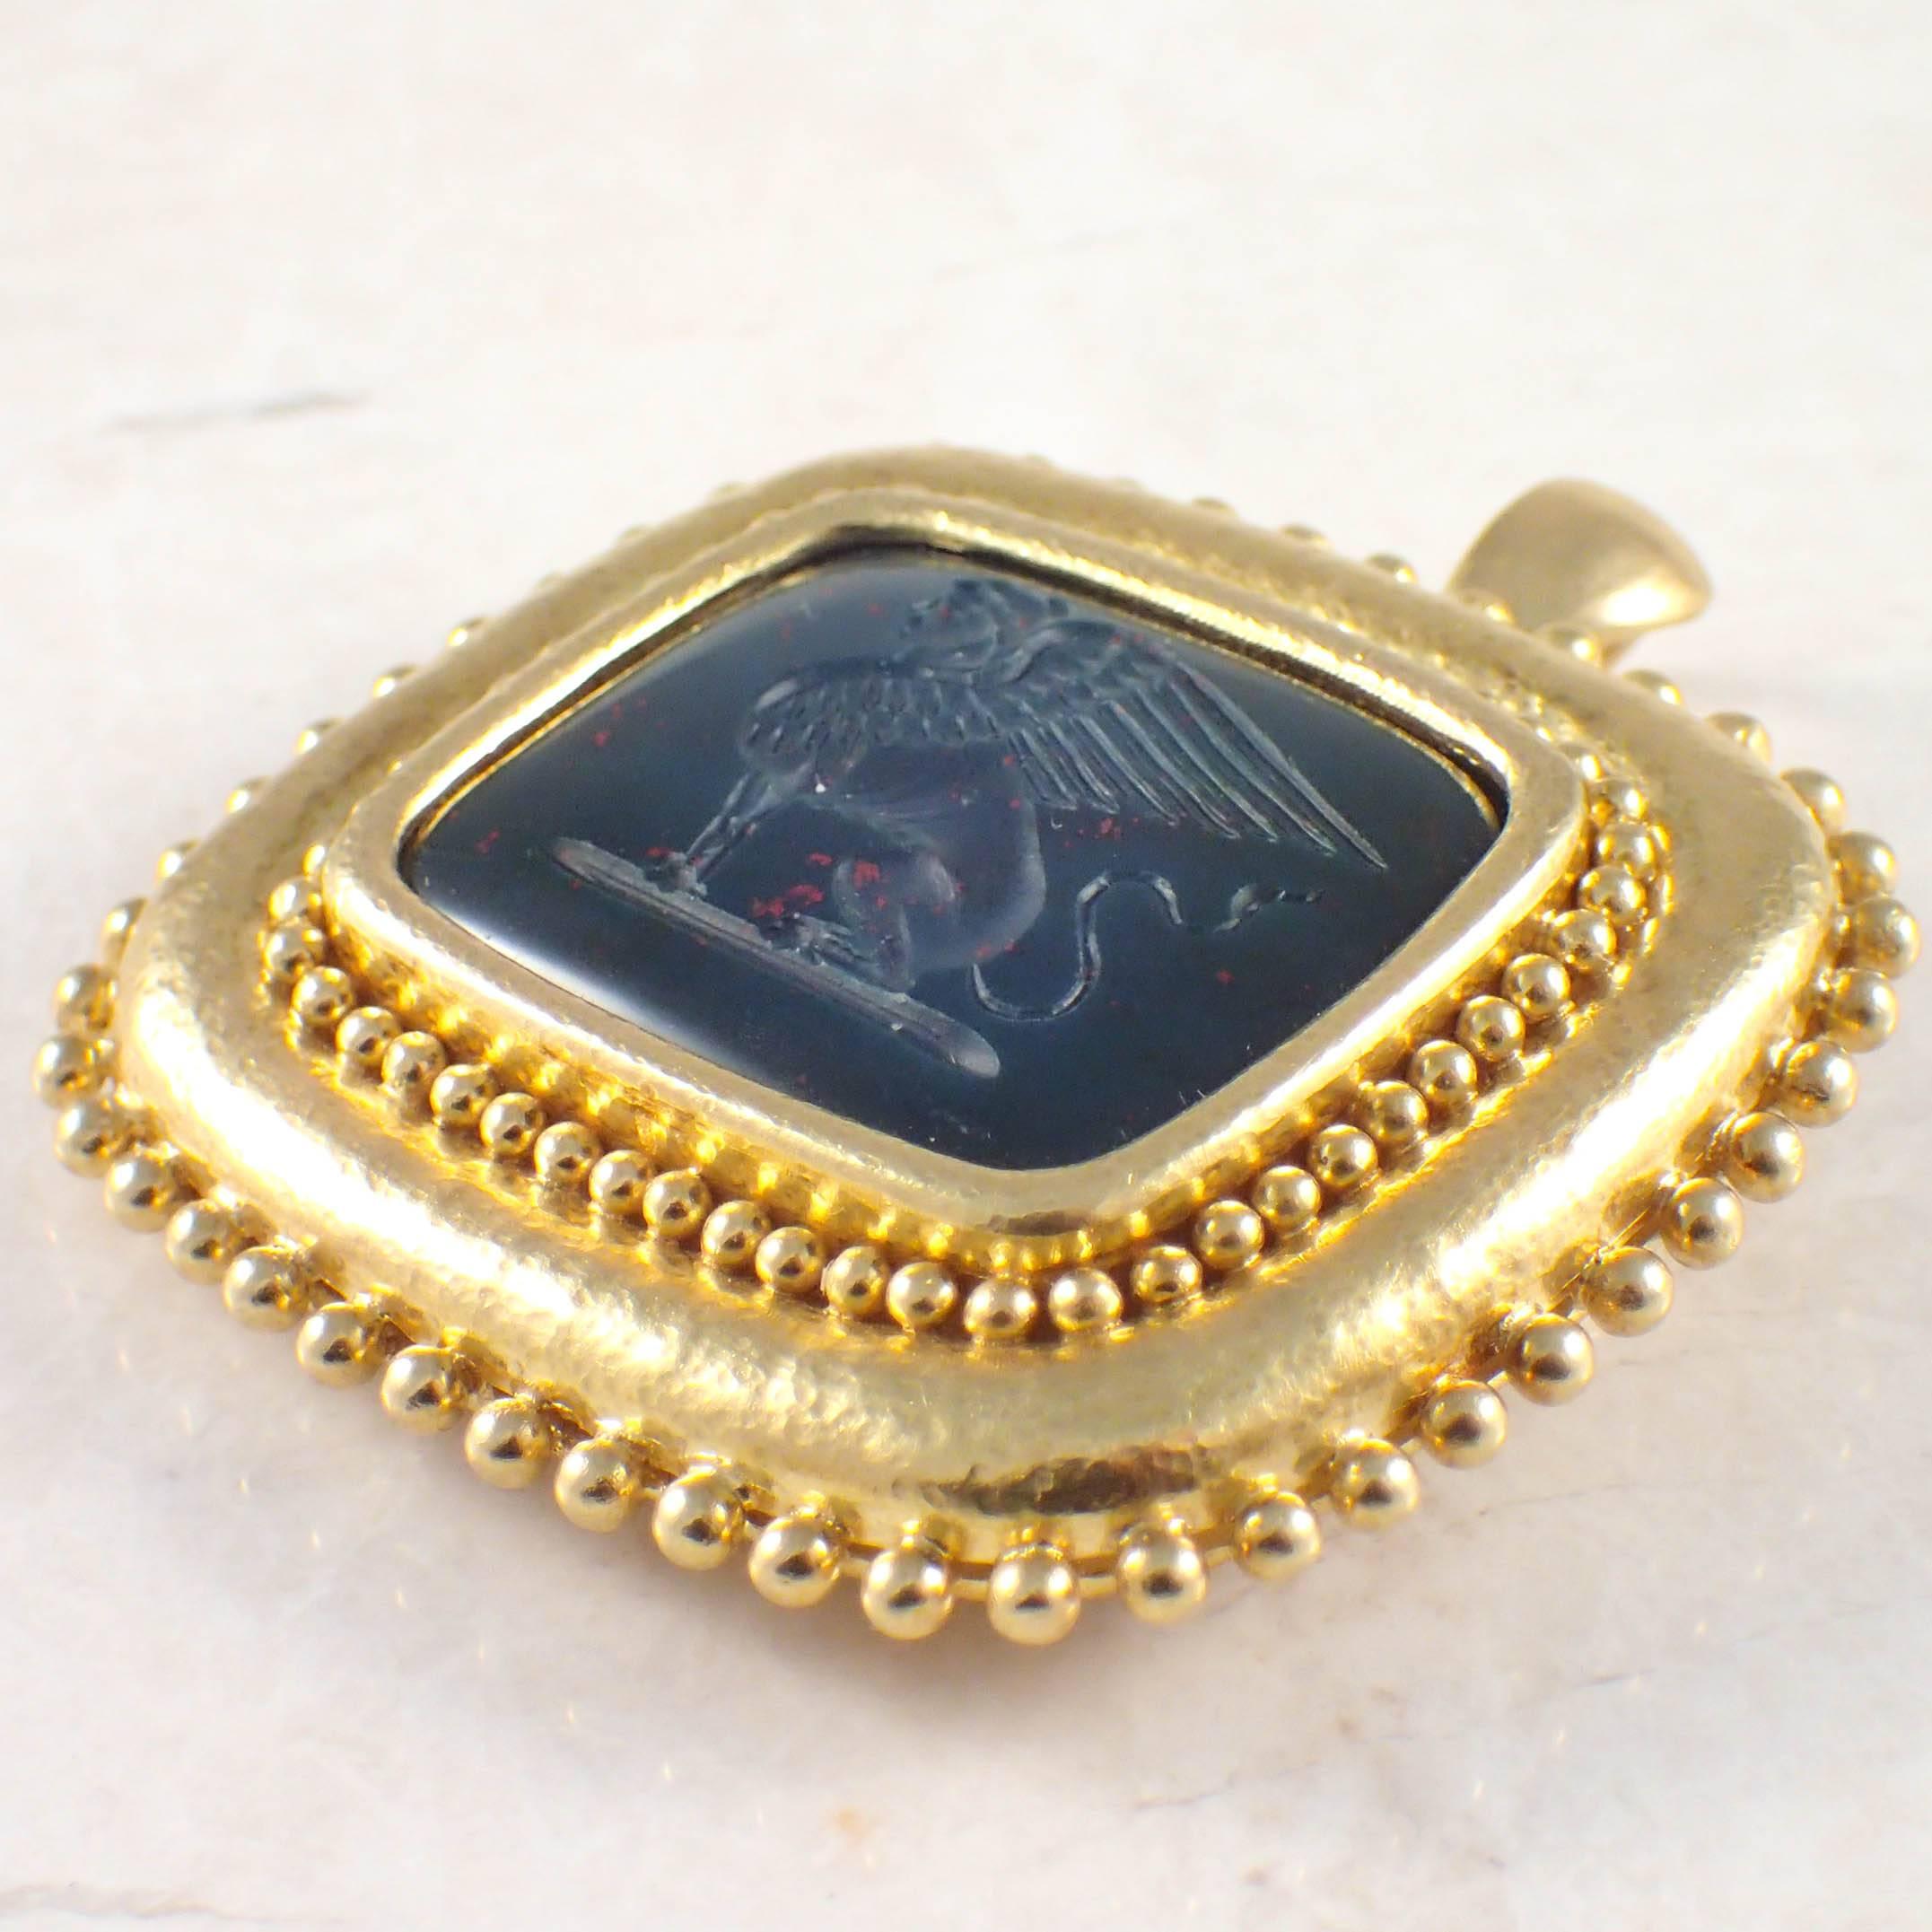 18K Yellow gold Elizabeth Locke intaglio pin/ pendant. The cushion shaped, carved bloodstone intaglio measures 27 X 21 mm within a gold frame decorated by gold beads. The pendant measures 2 X 1 1/2 inches and weighs 24.7 DWTs/ 38.4 grams. Stamped